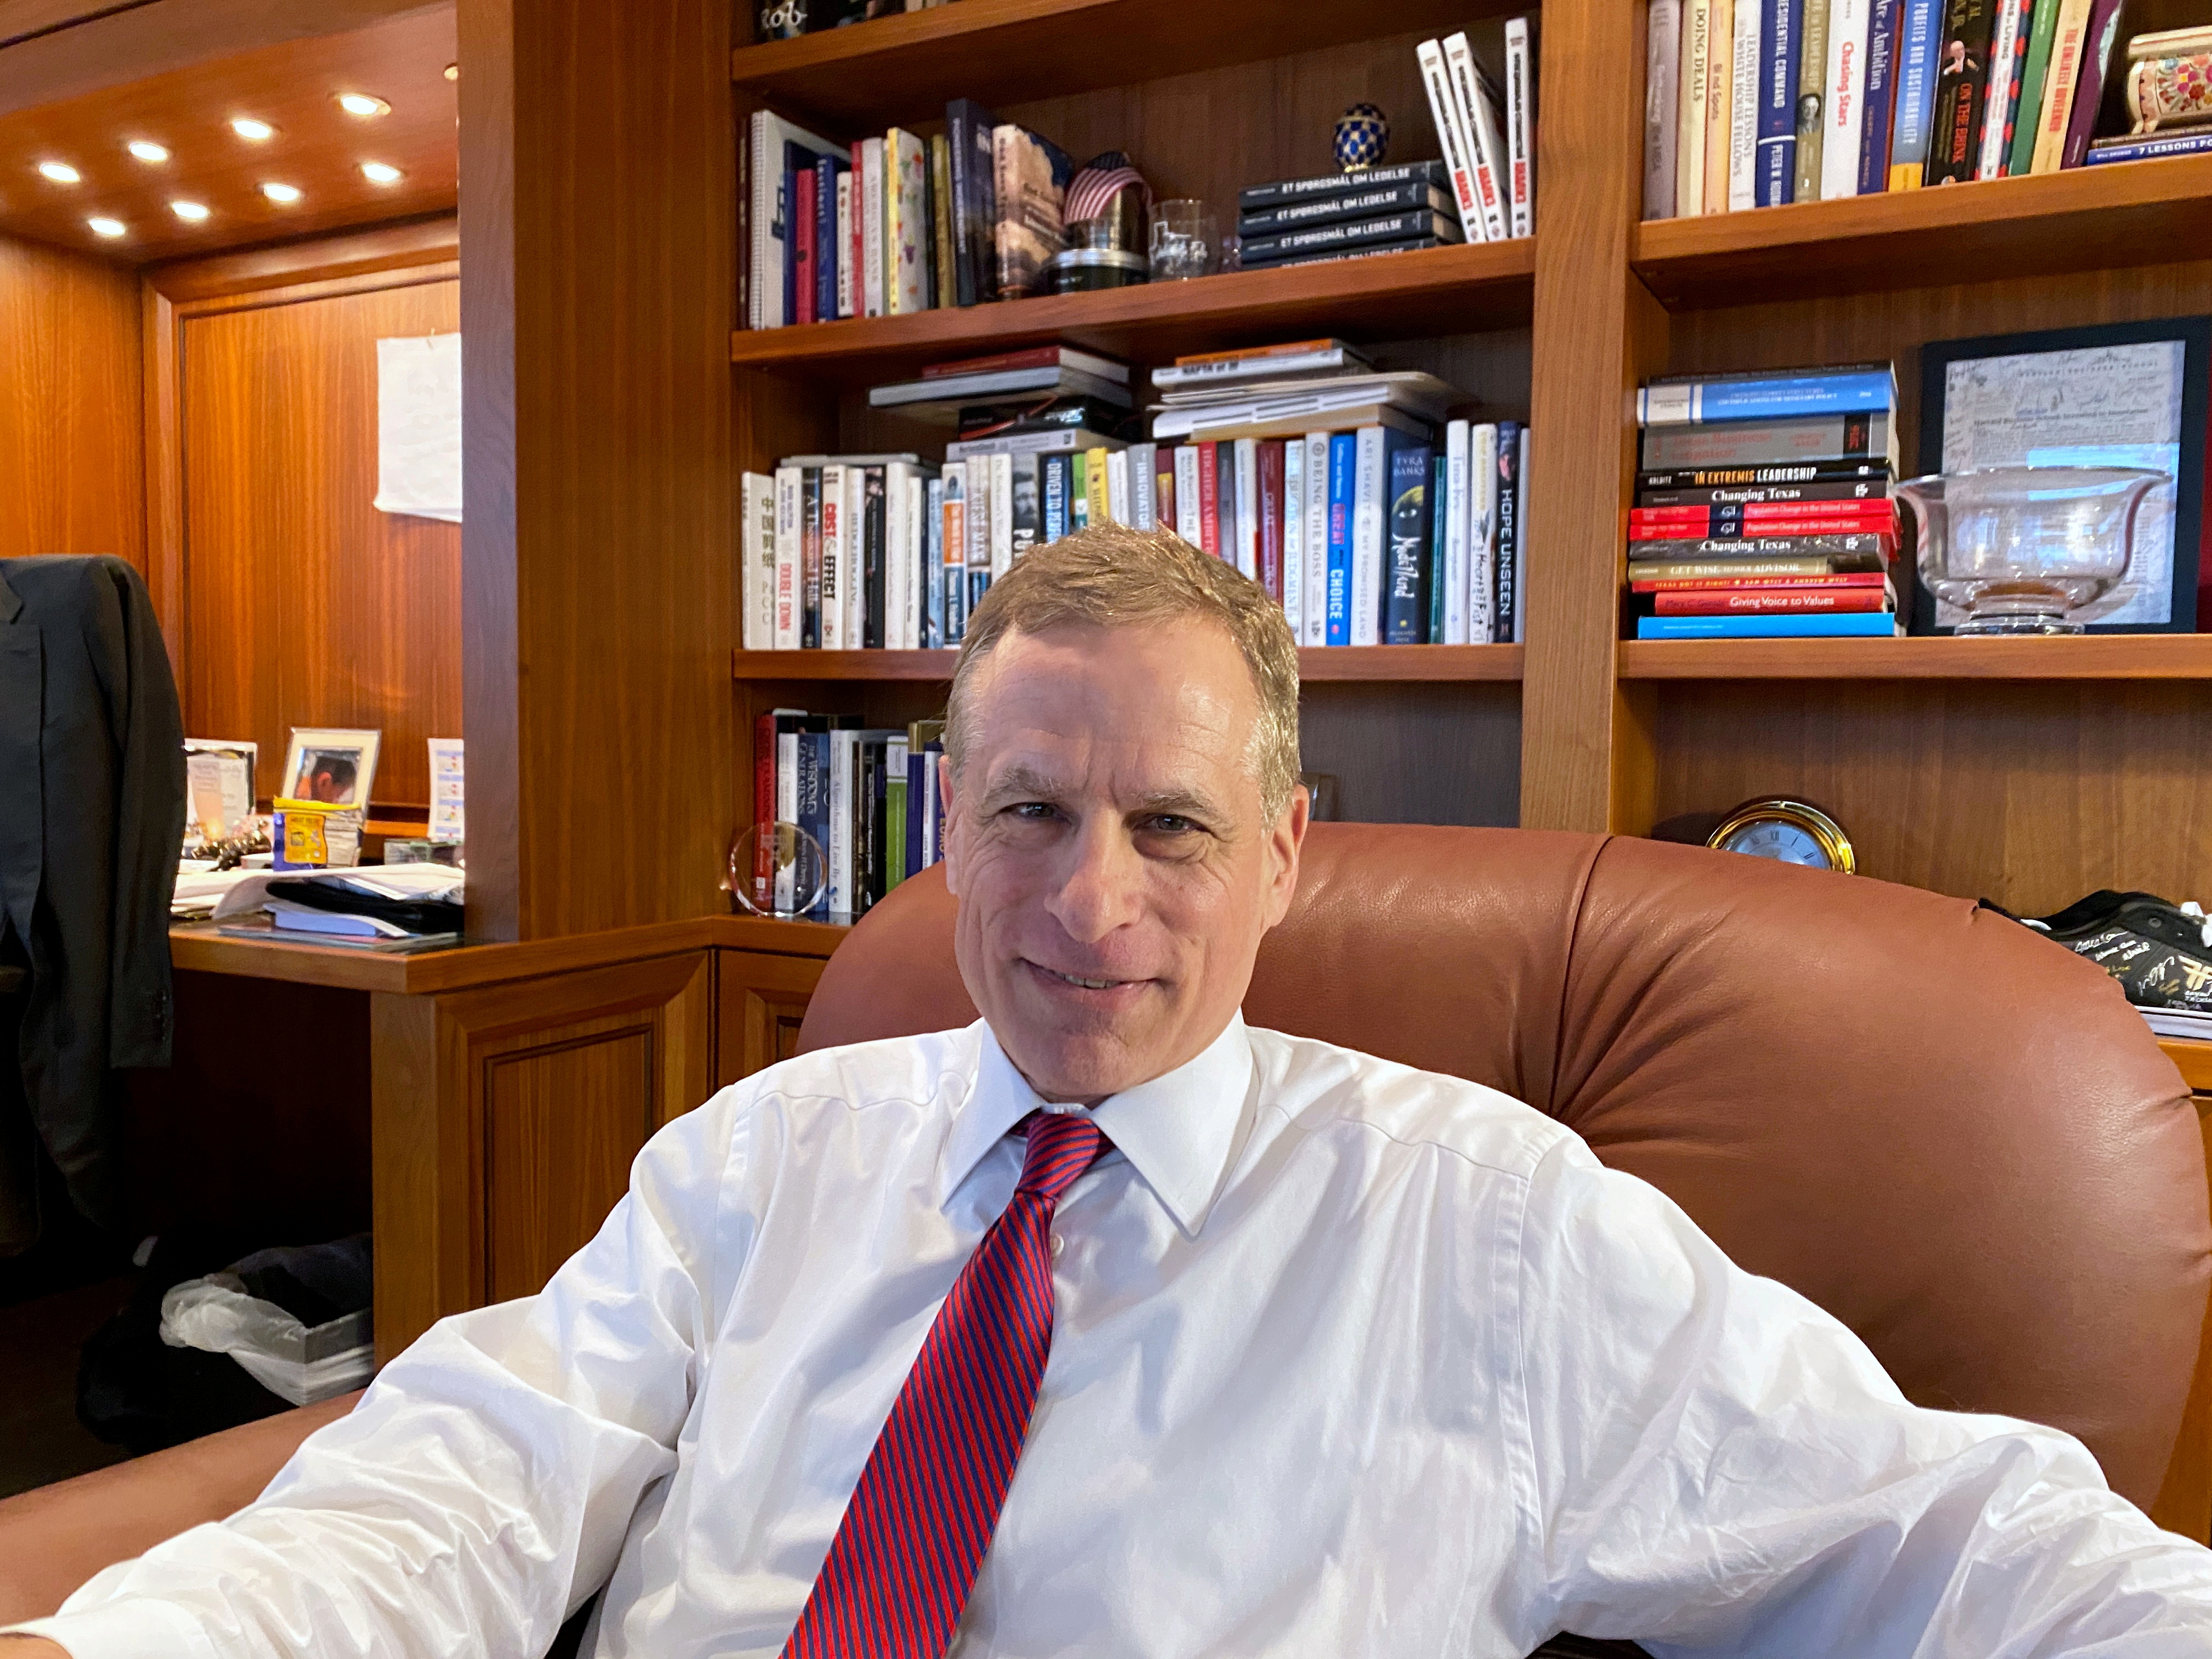 Dallas Federal Reserve Bank President Robert Kaplan speaks during an interview in his office at the bank's headquarters in Dallas